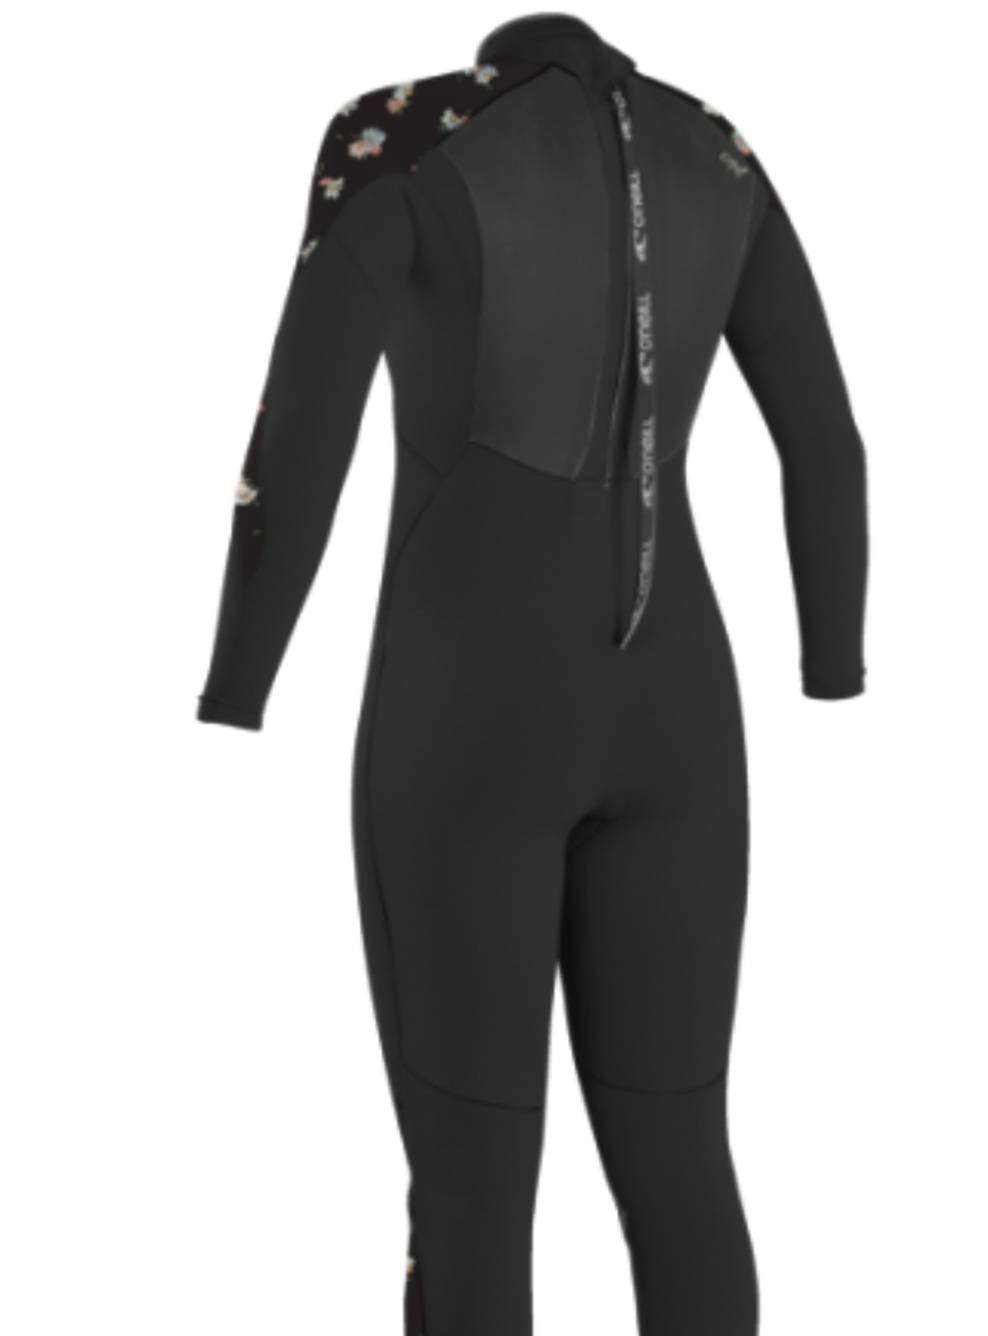 O'NEILL EPIC 5/4MM WOMENS BACK ZIP WETSUIT - BLACK/ CINDYDAISY 4218